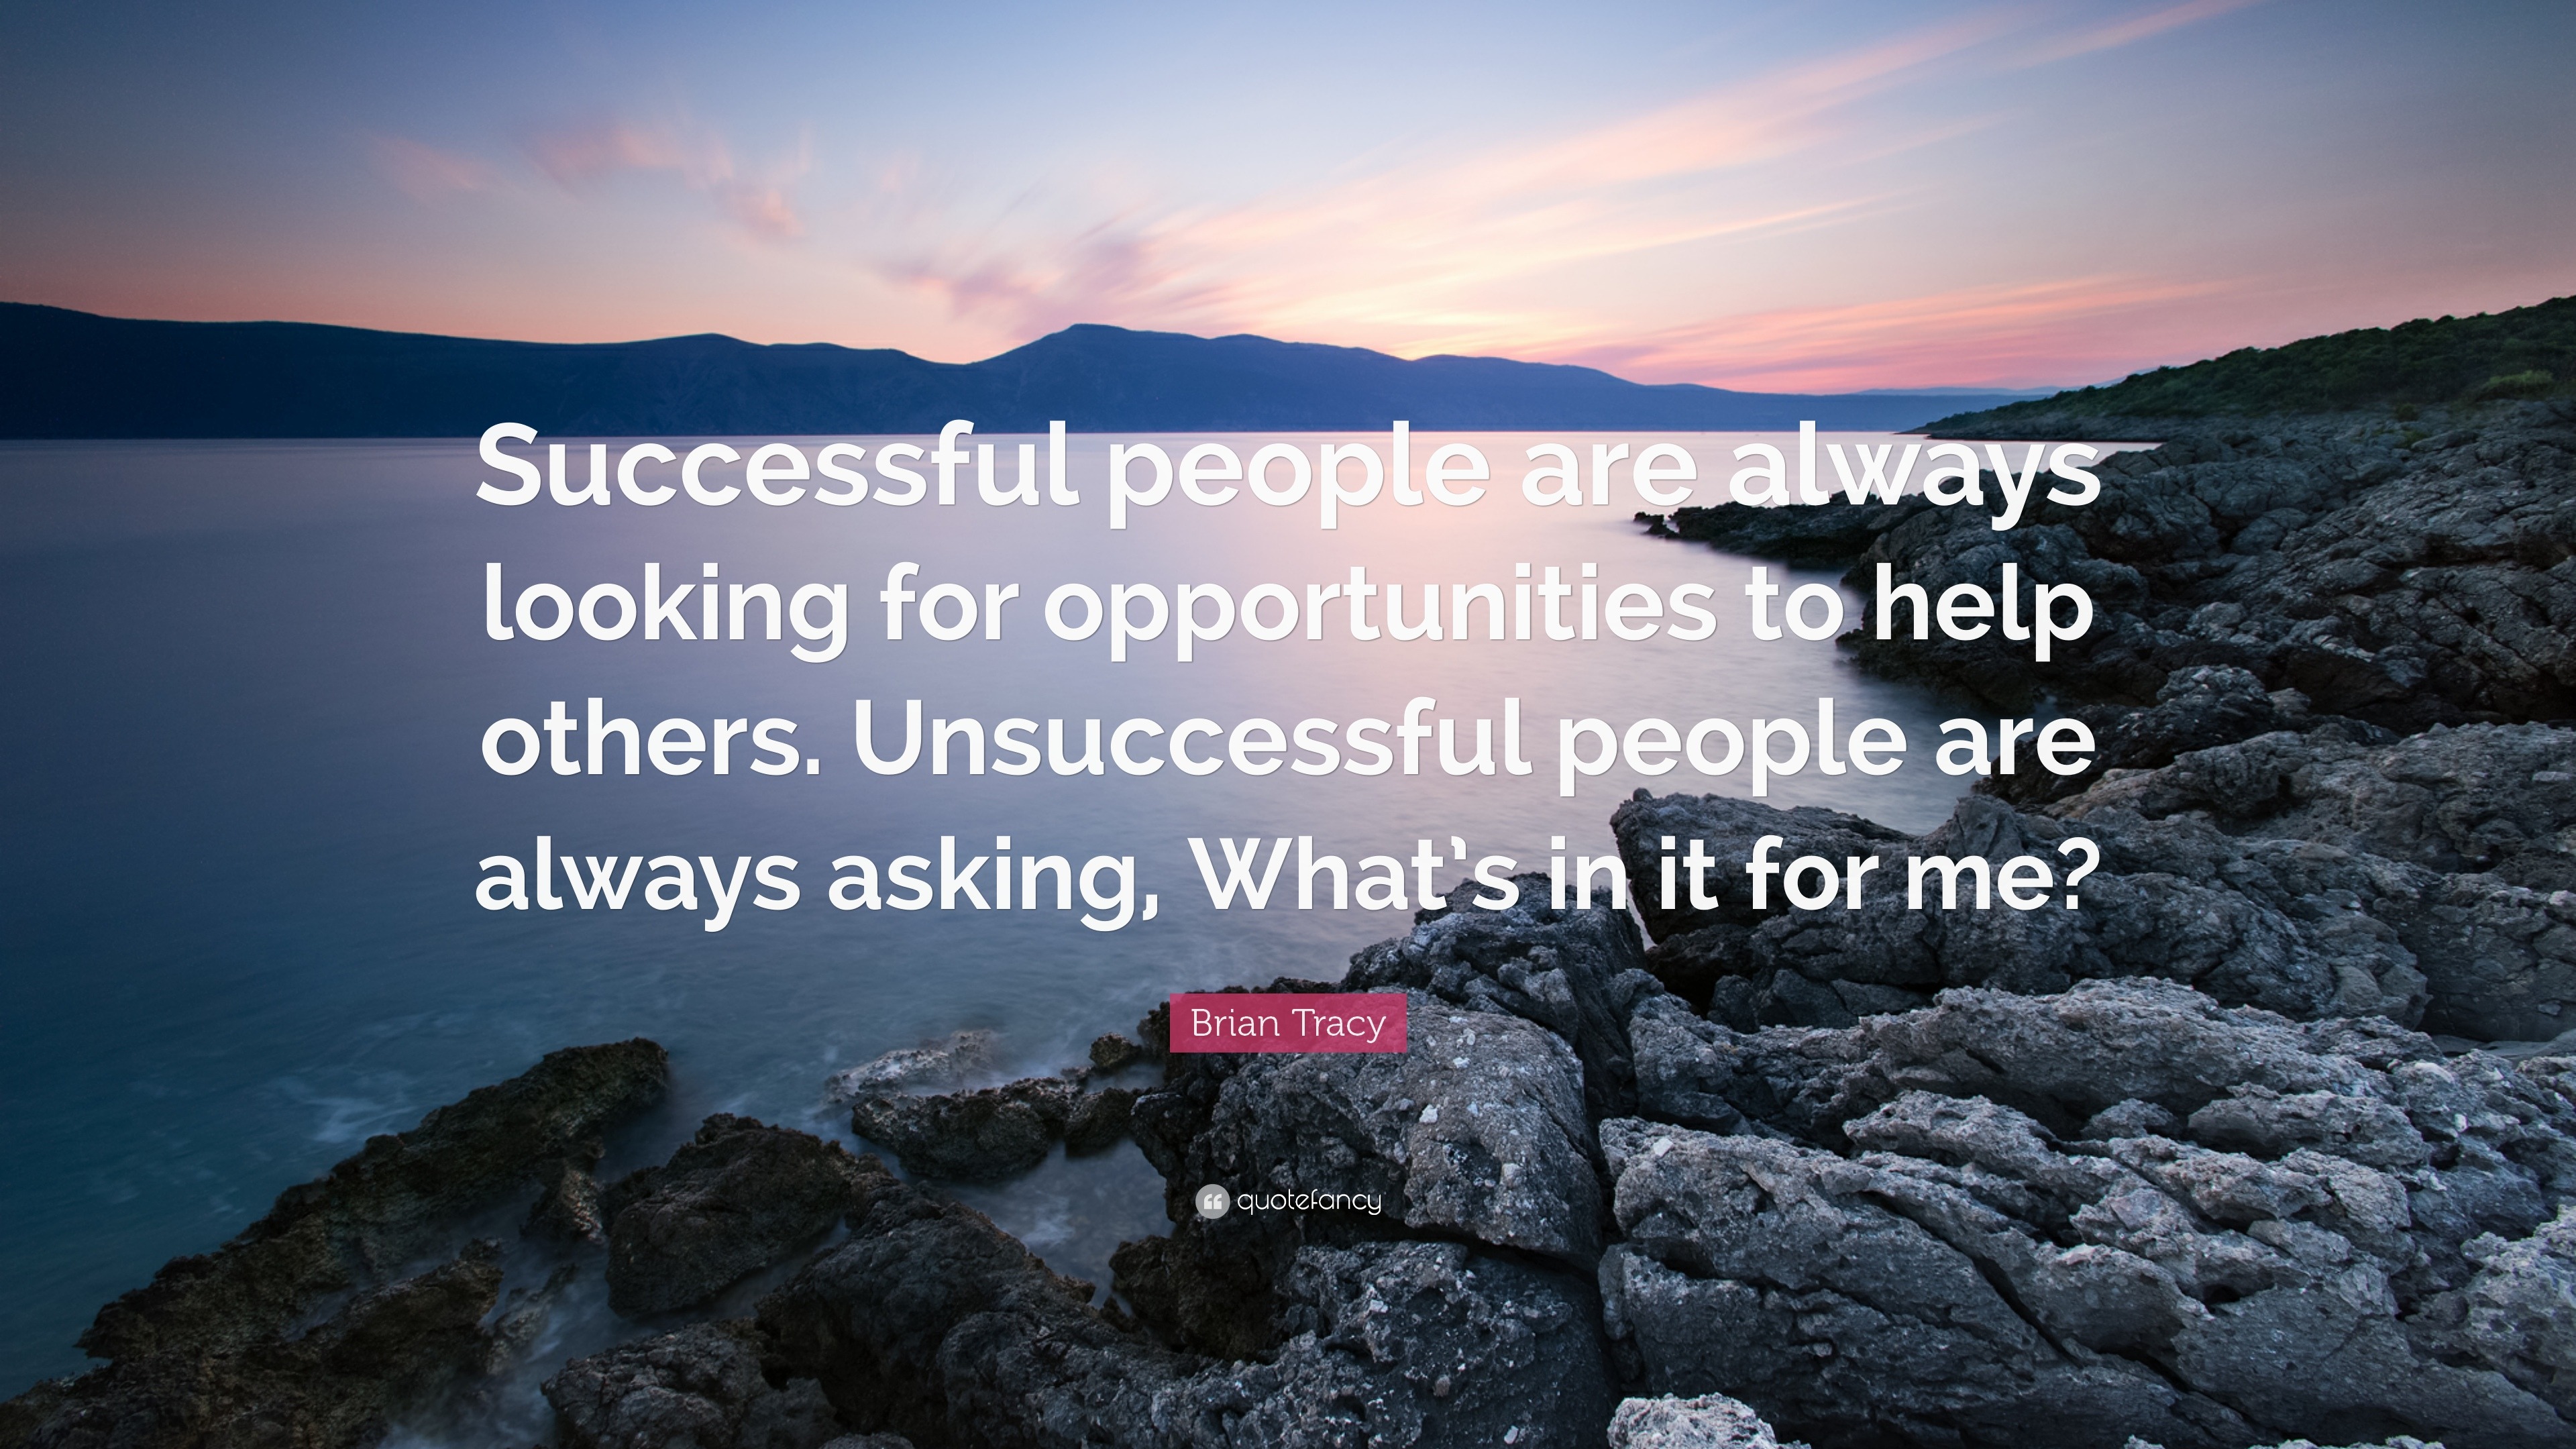 Brian Tracy Quote: “Successful people are always looking for